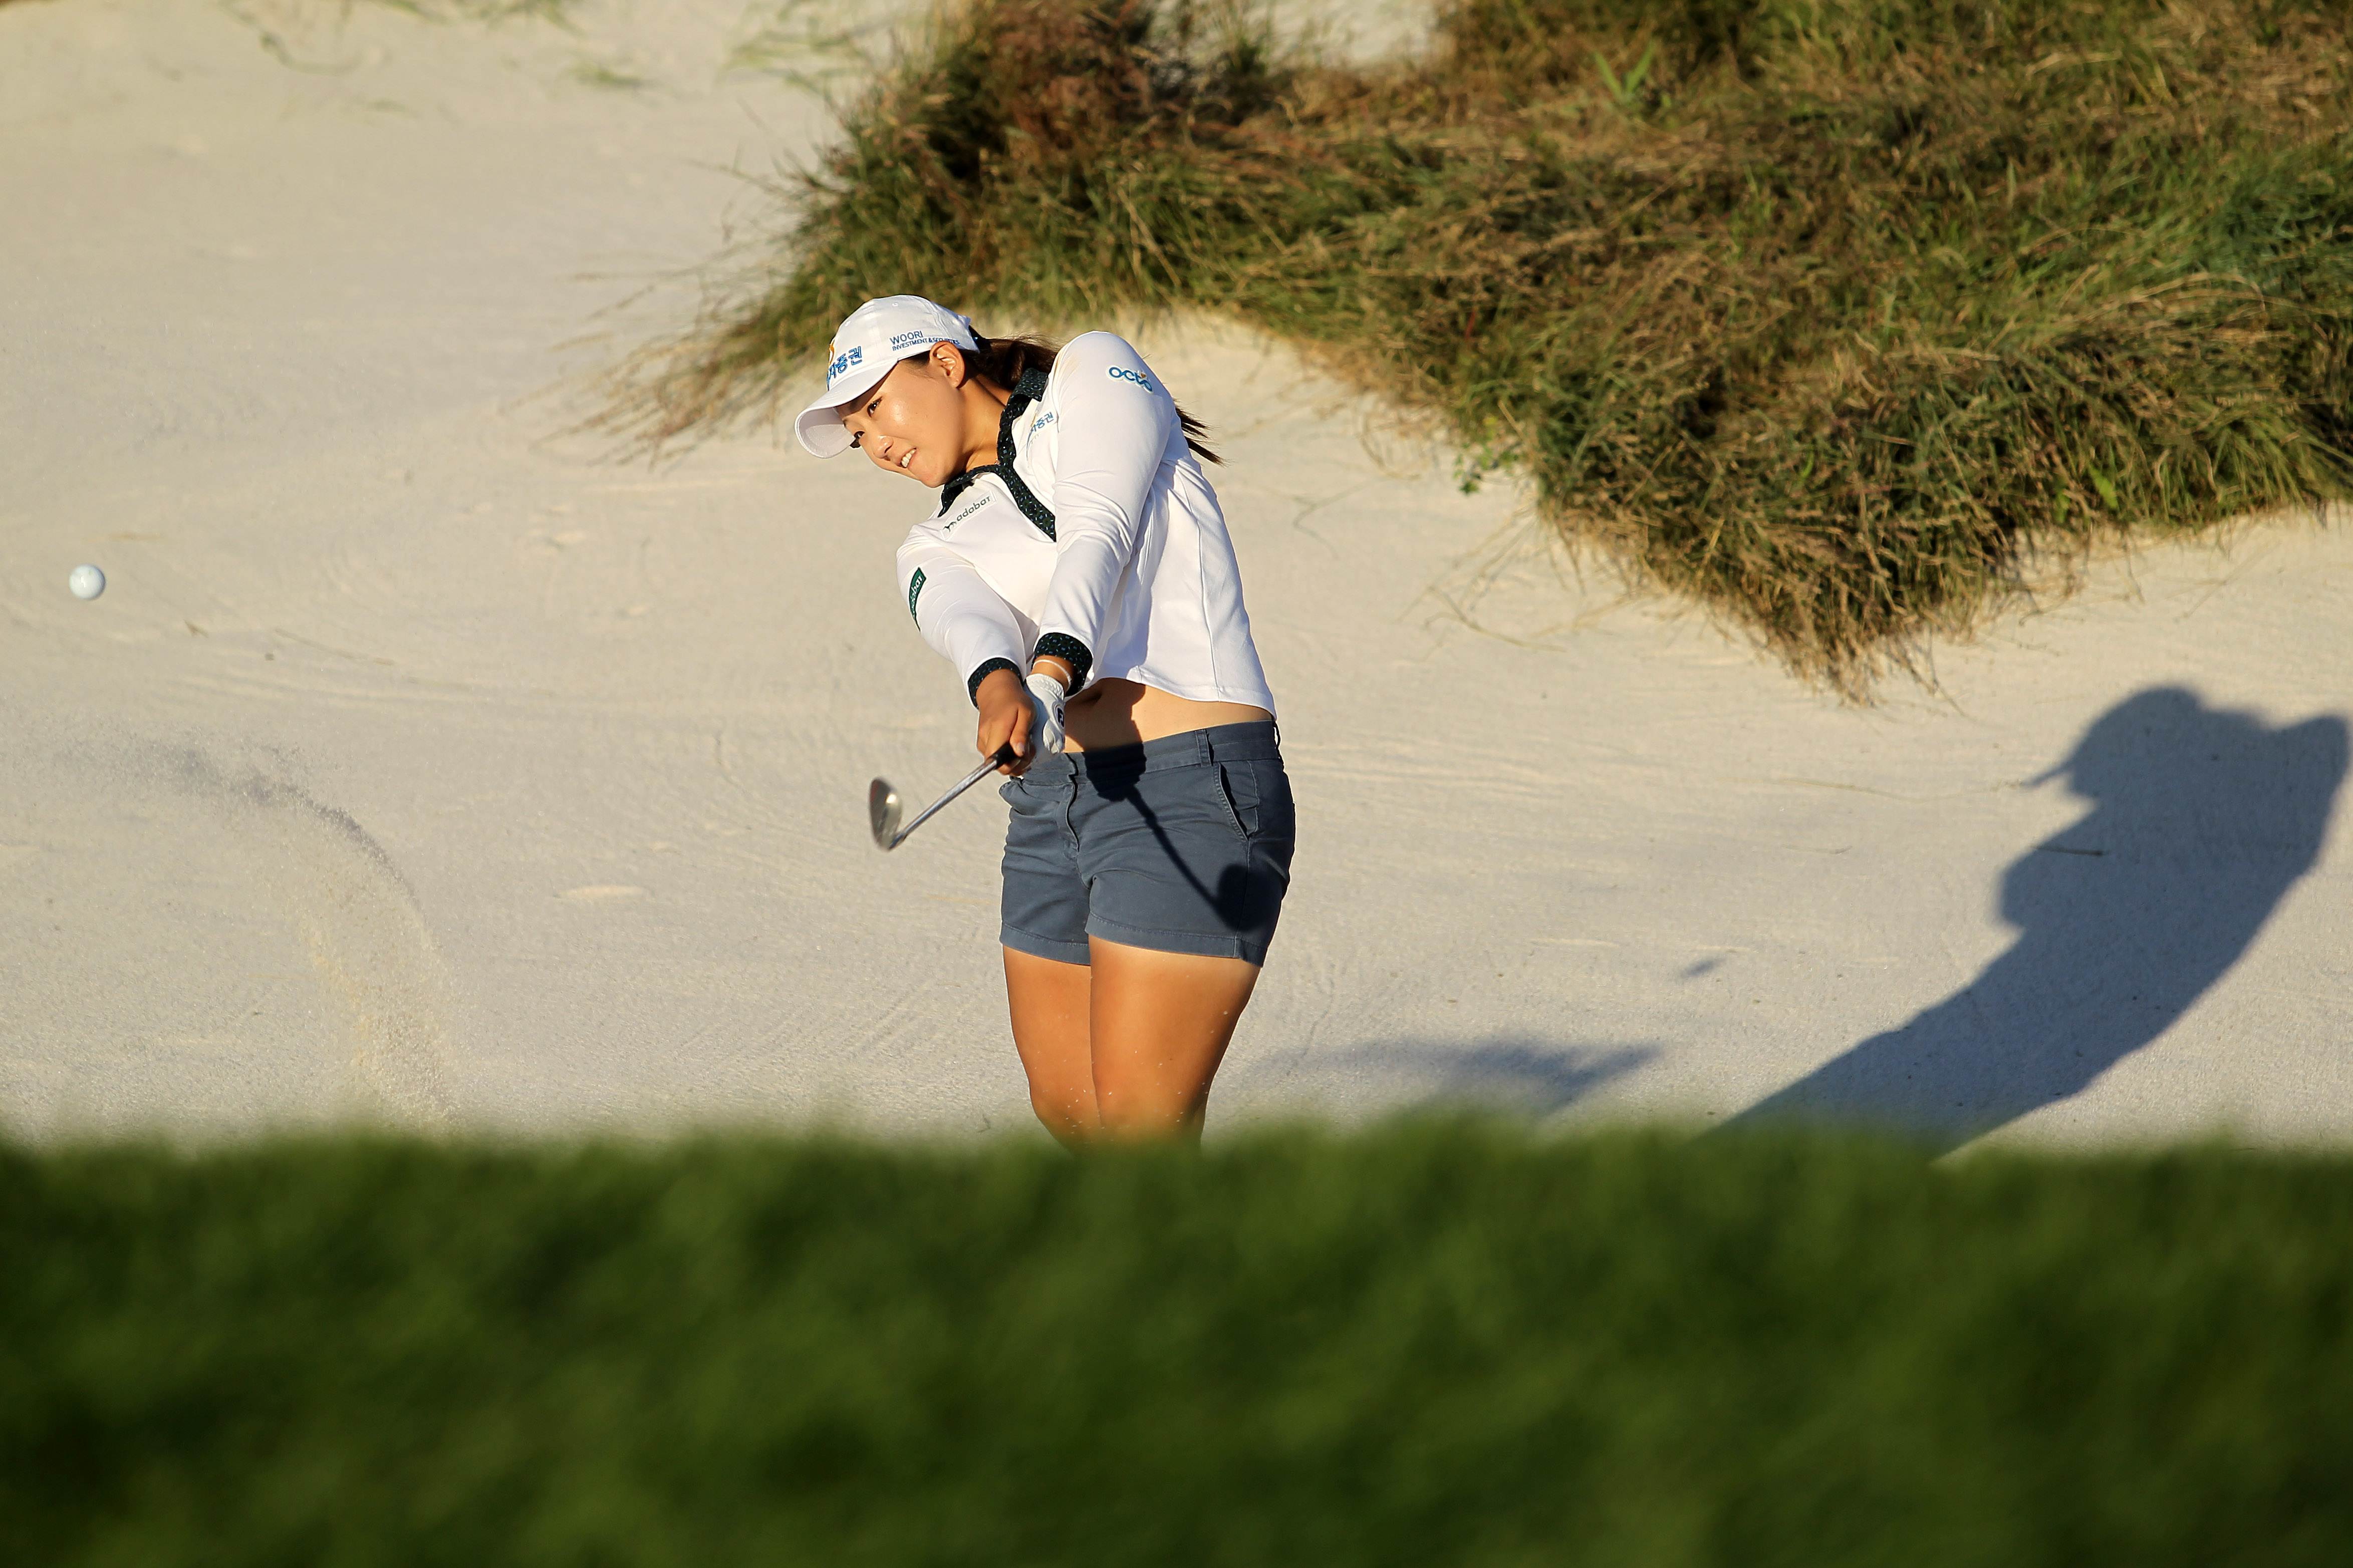 Mirim Lee of South Korea hits the ball from a sand trap during the final round at the Reignwood LPGA Classic at the Reignwood Pine Valley Golf Club near Beijing. Photo: AFP 